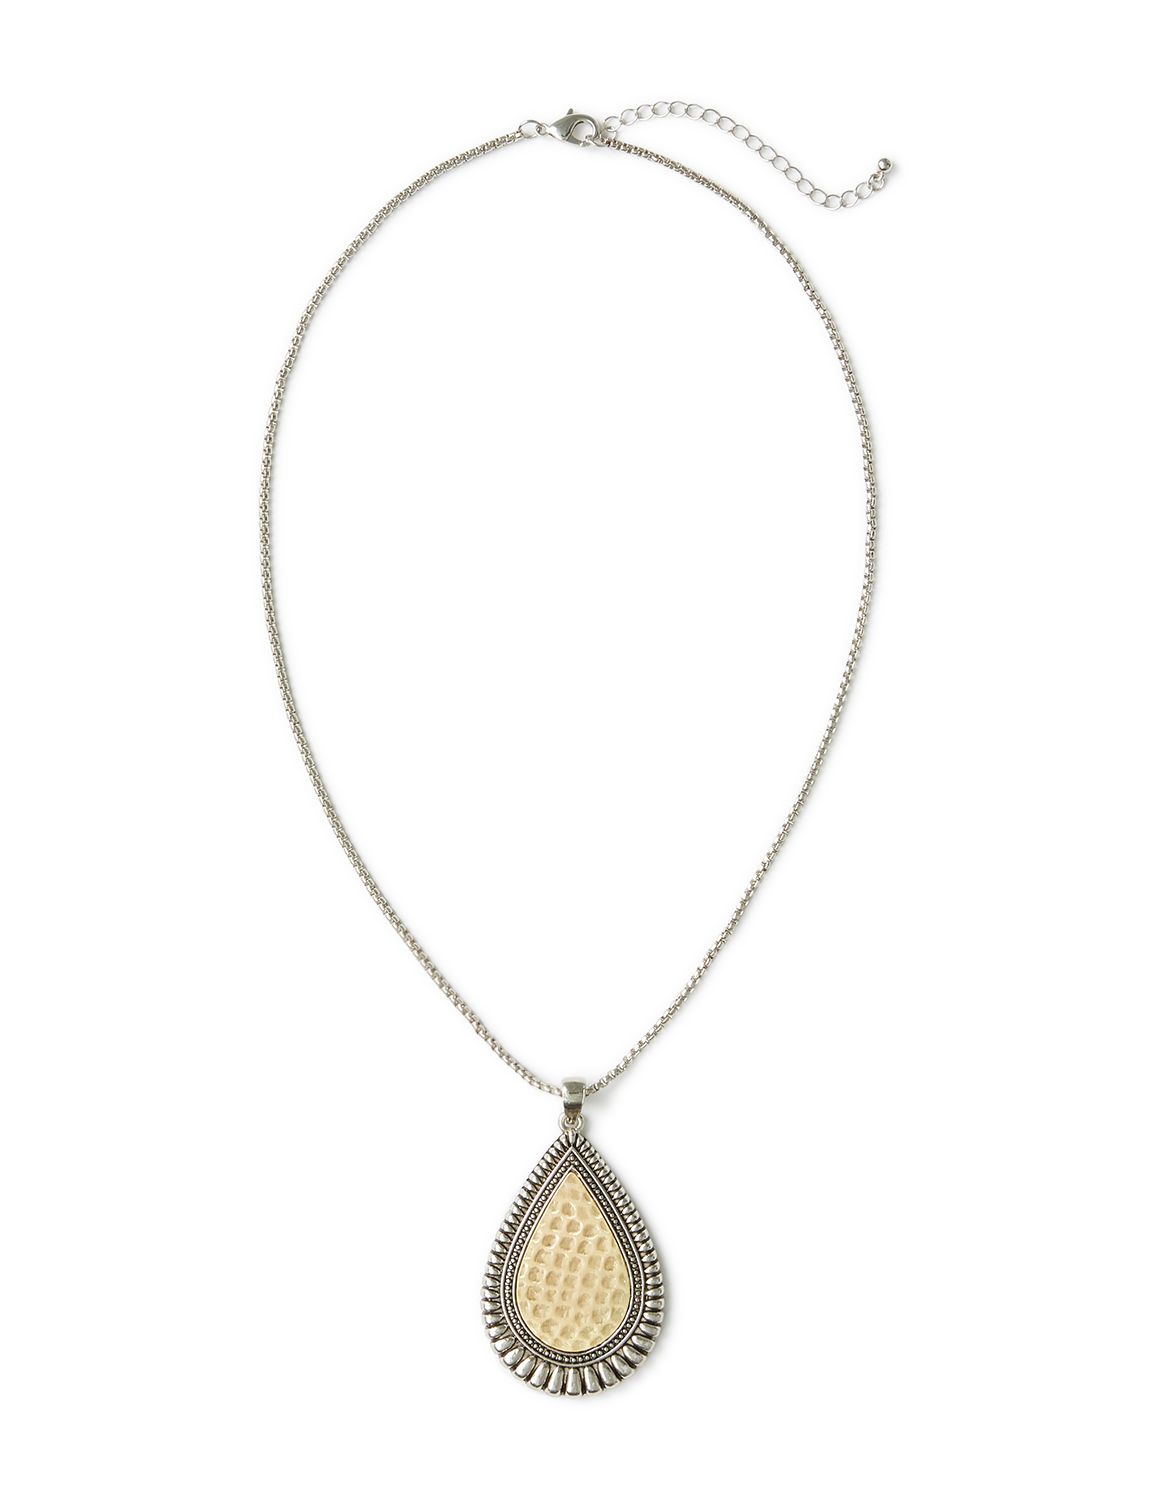 Women's Fashion & Statement Necklaces | Catherines